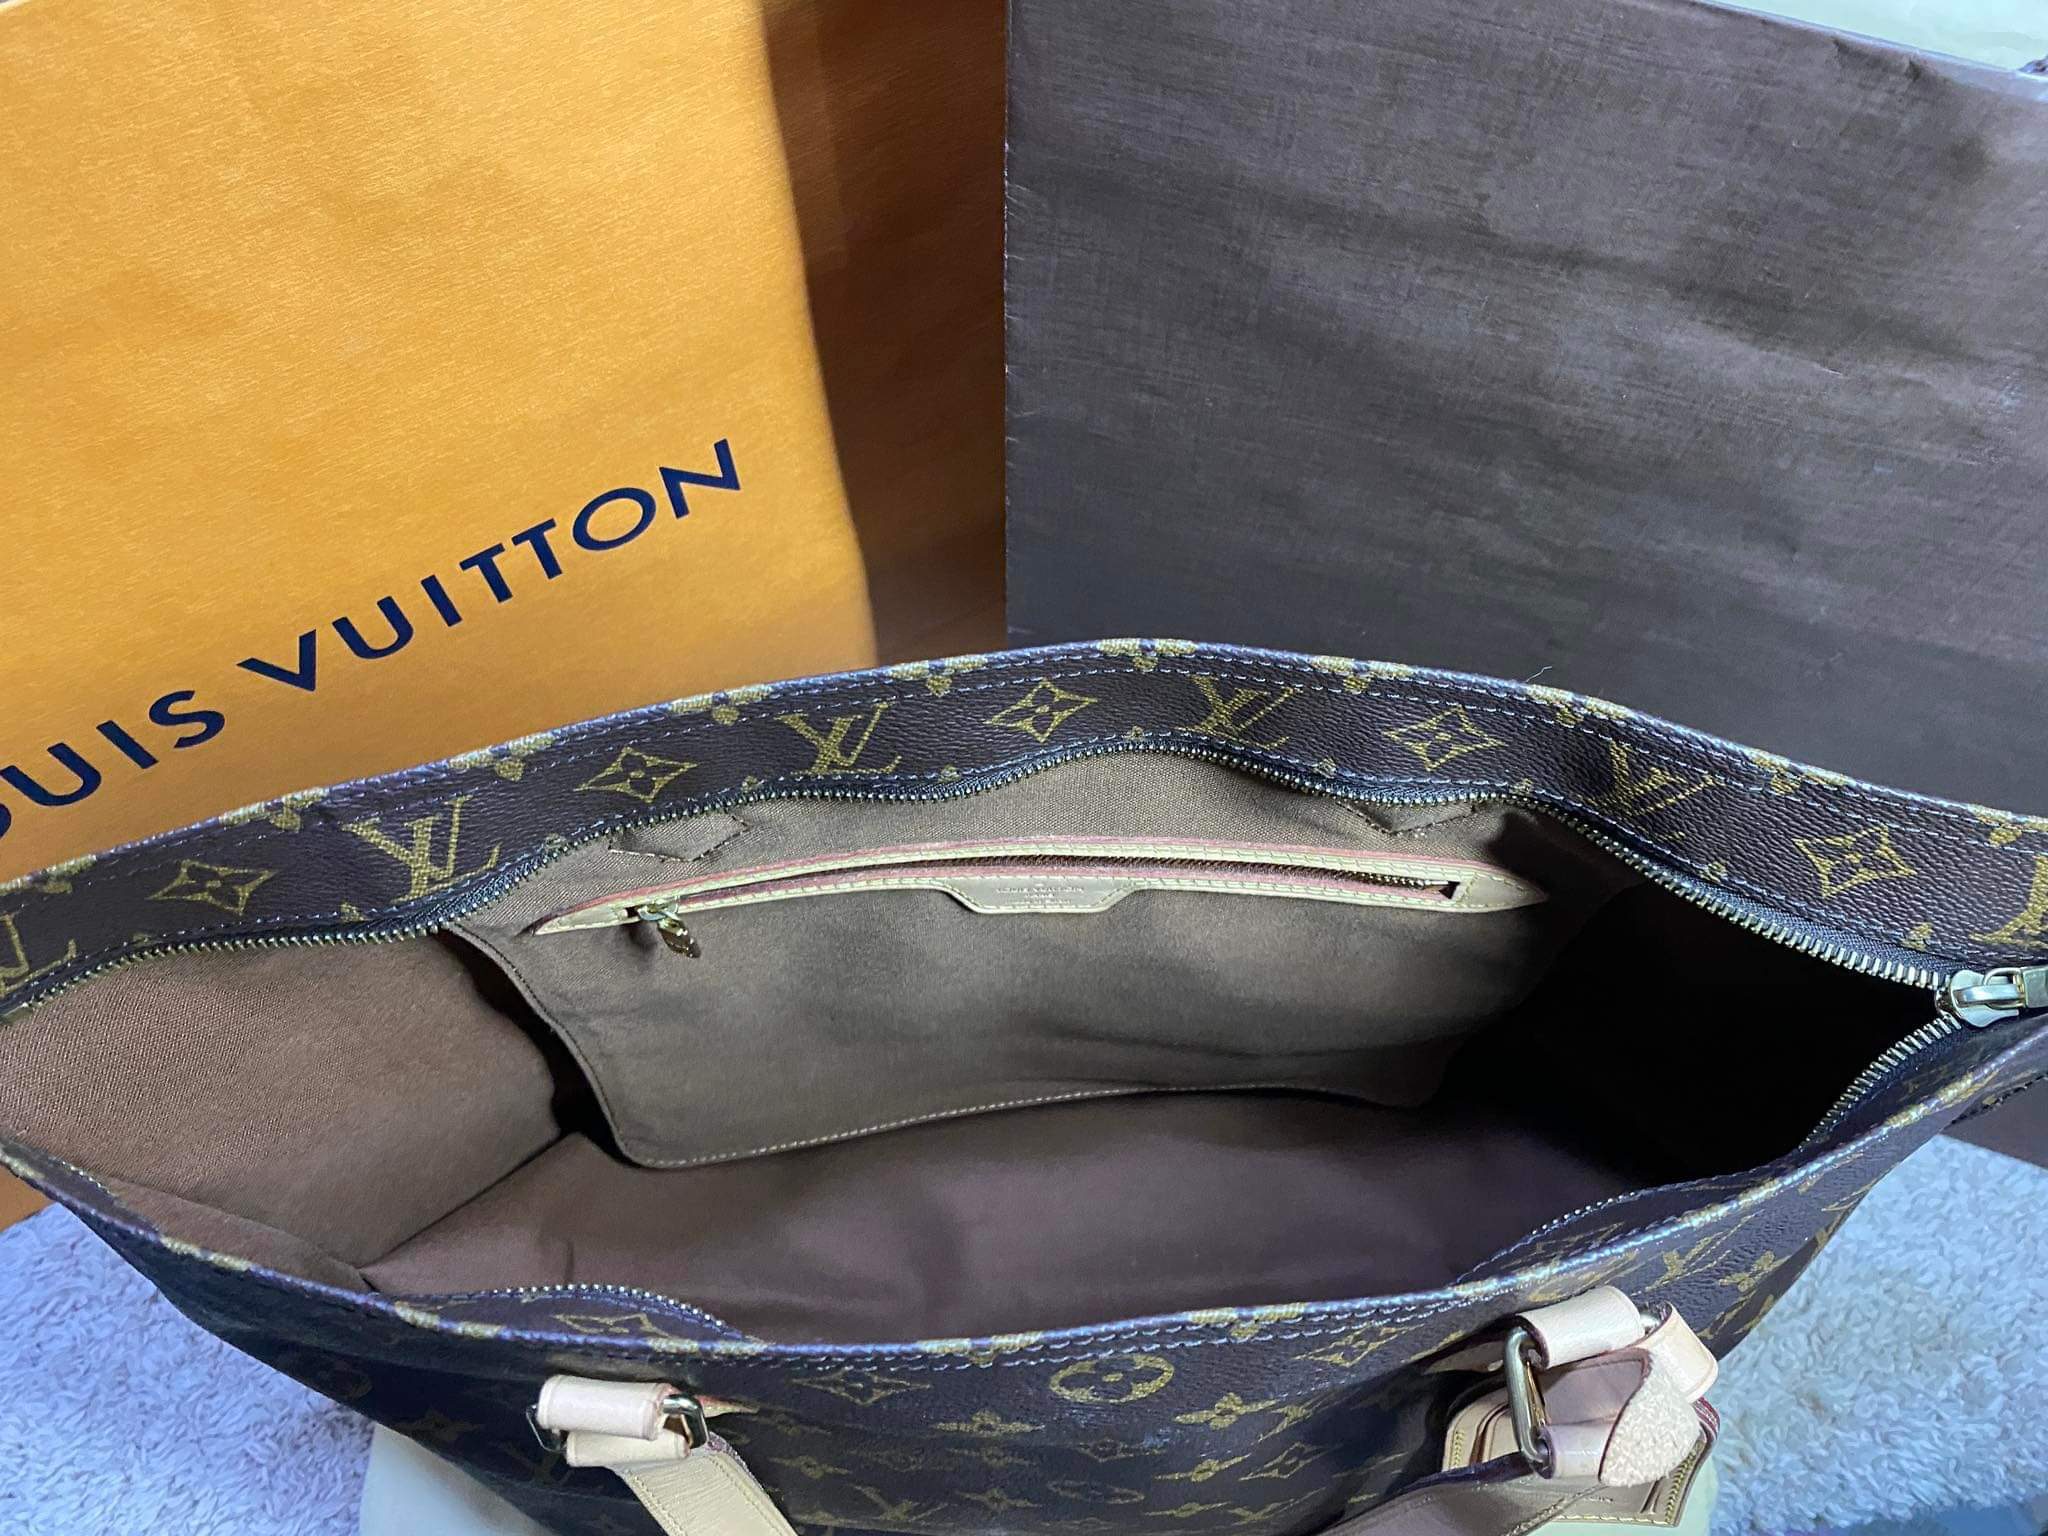 MILEAPOCLOSET on X: #Nnattawin is with Louis Vuitton's tote bag